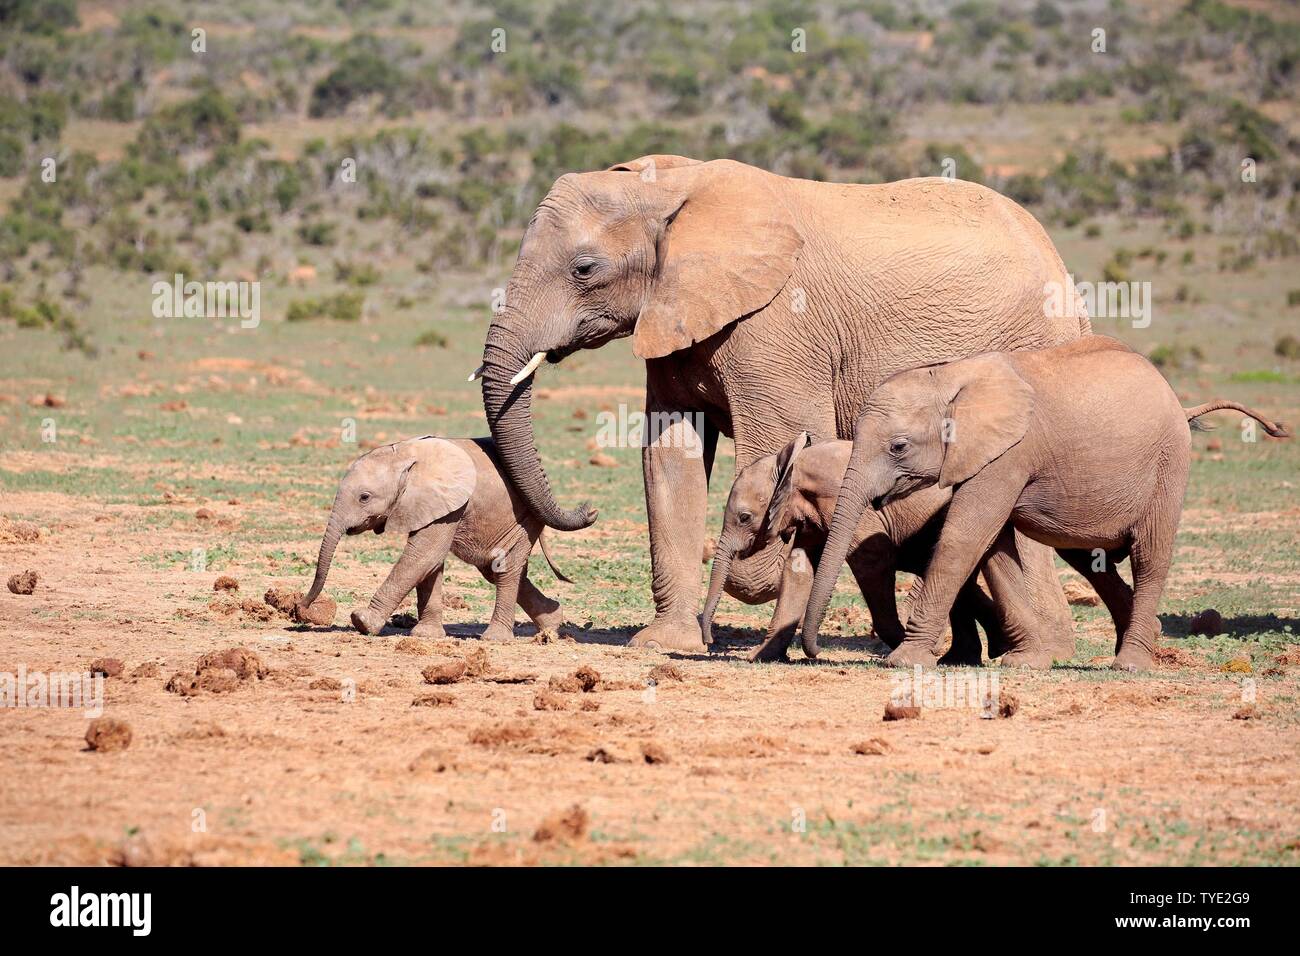 African elephants (Loxodonta africana), herd with young animals walking, Addo Elephant National Park, Eastern Cape, South Africa Stock Photo